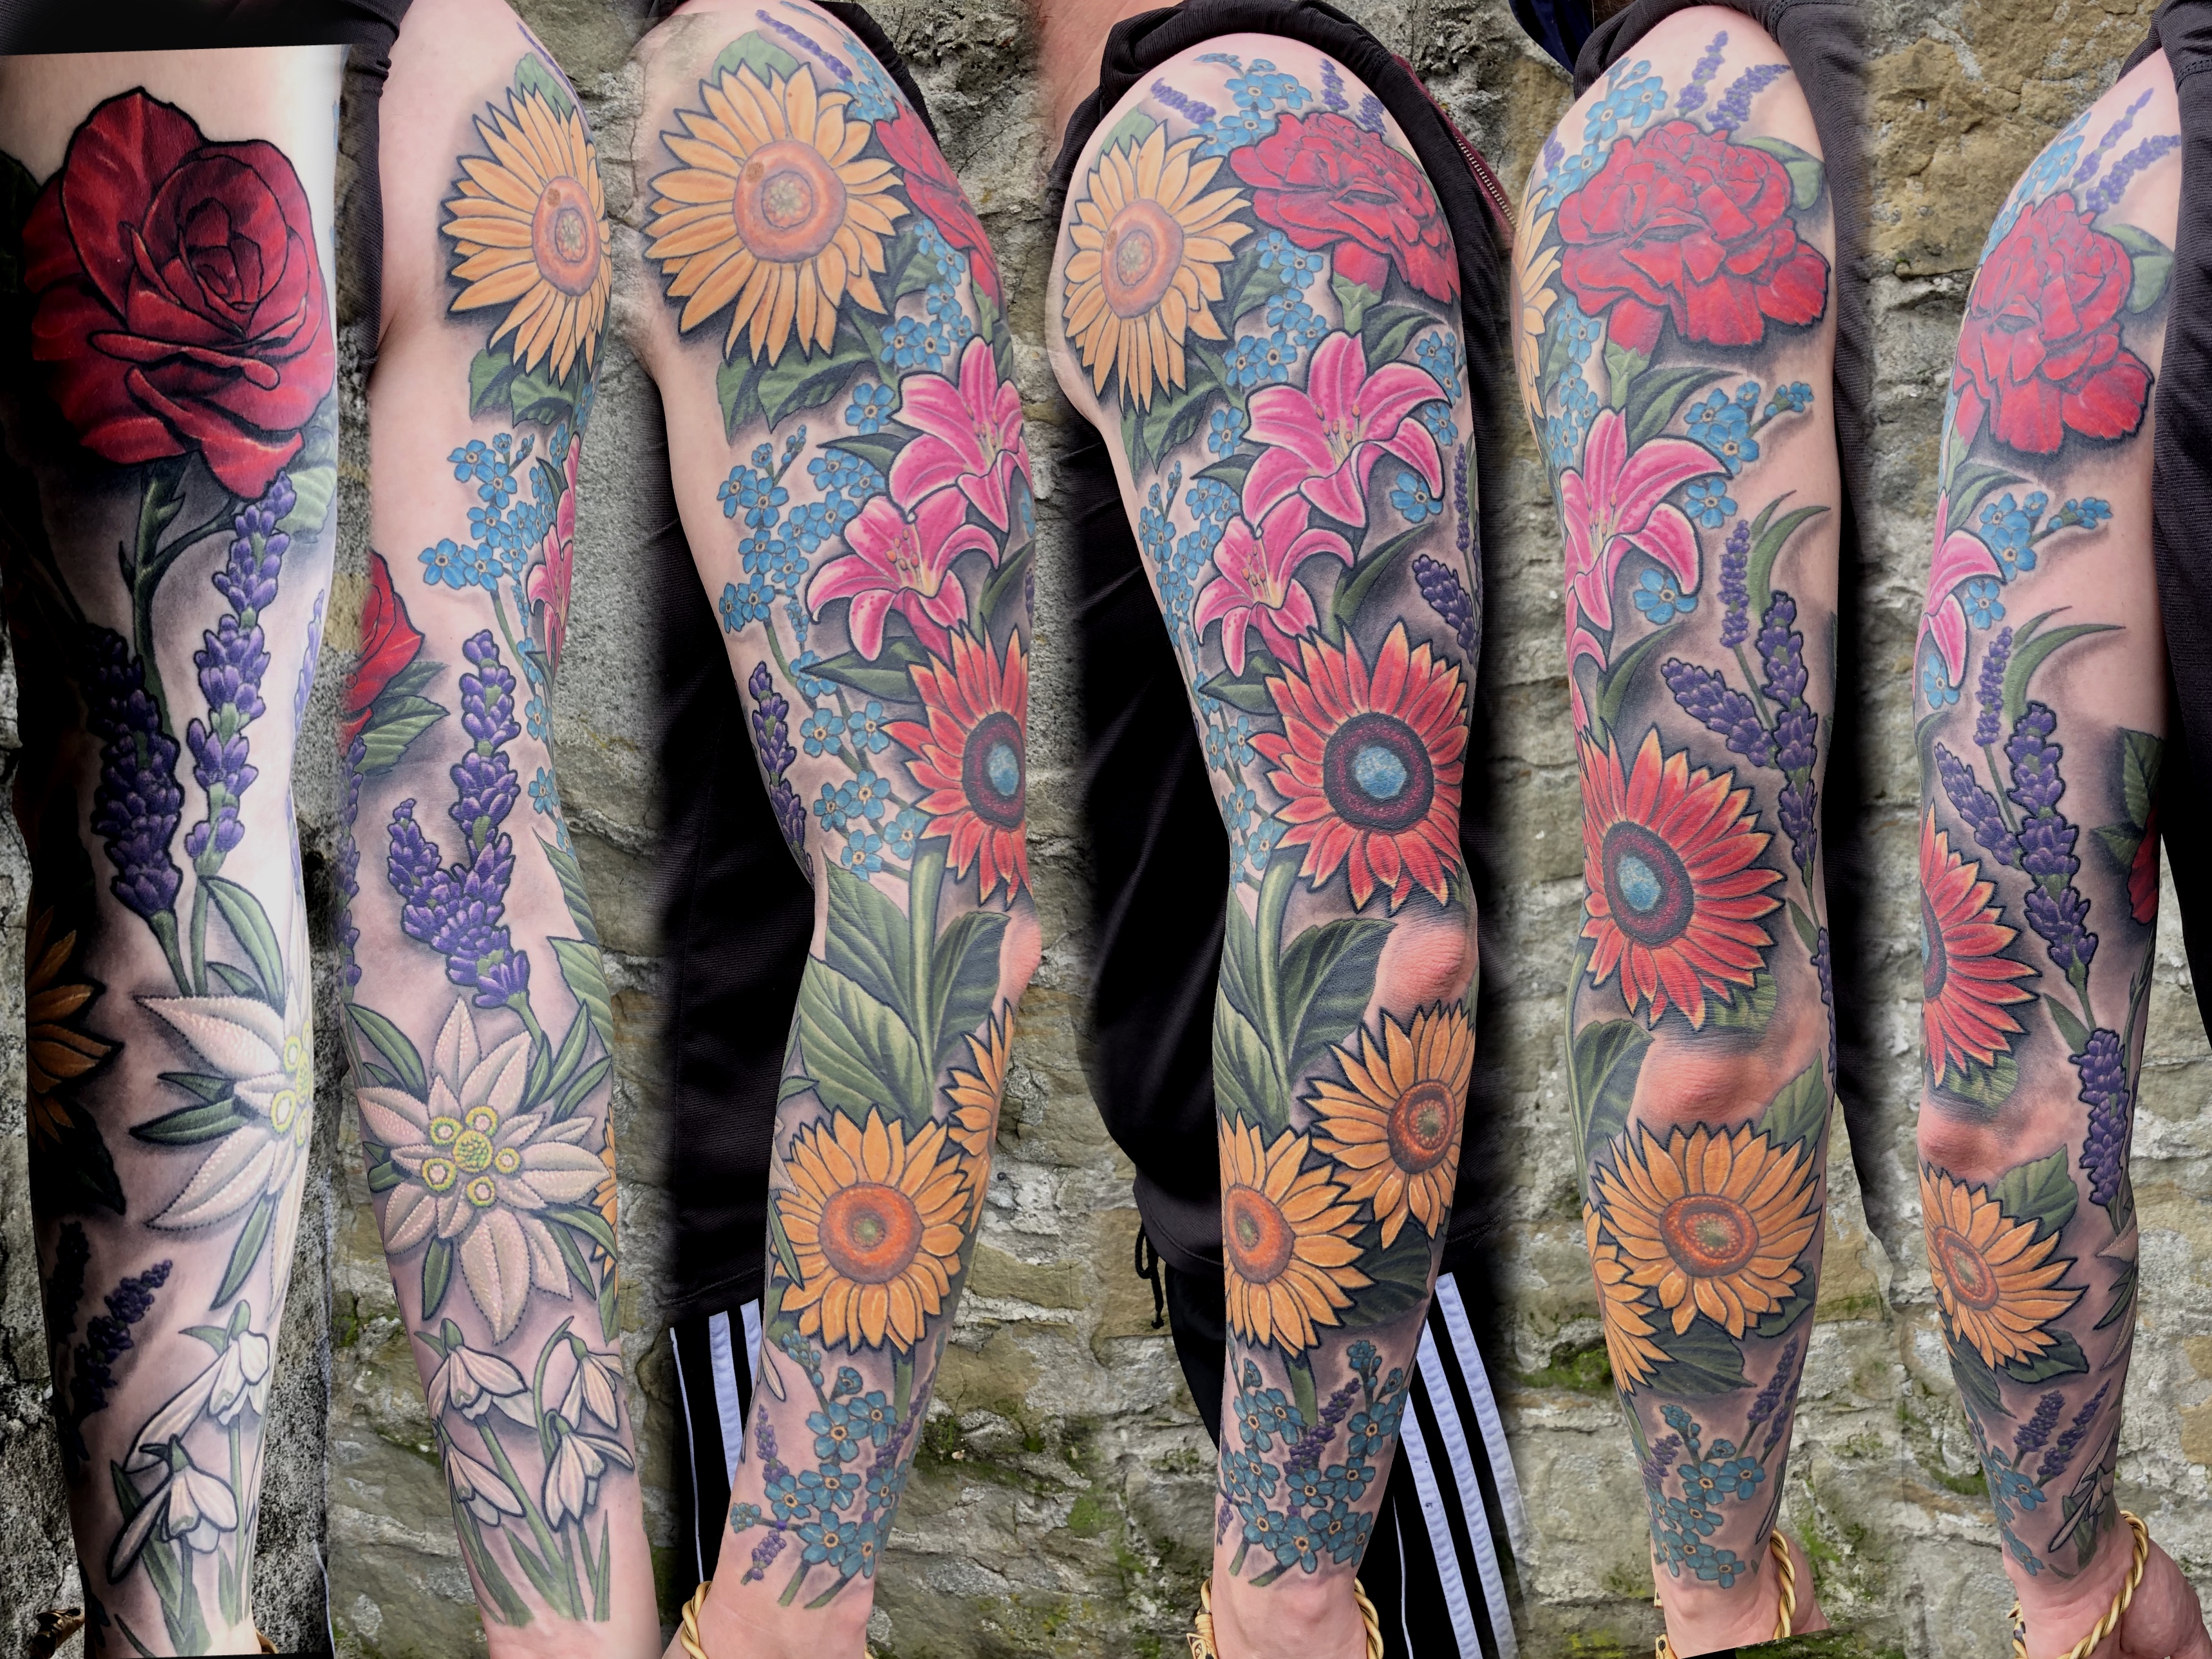 120 Pretty And Girly HalfSleeve Tattoo Ideas For Females